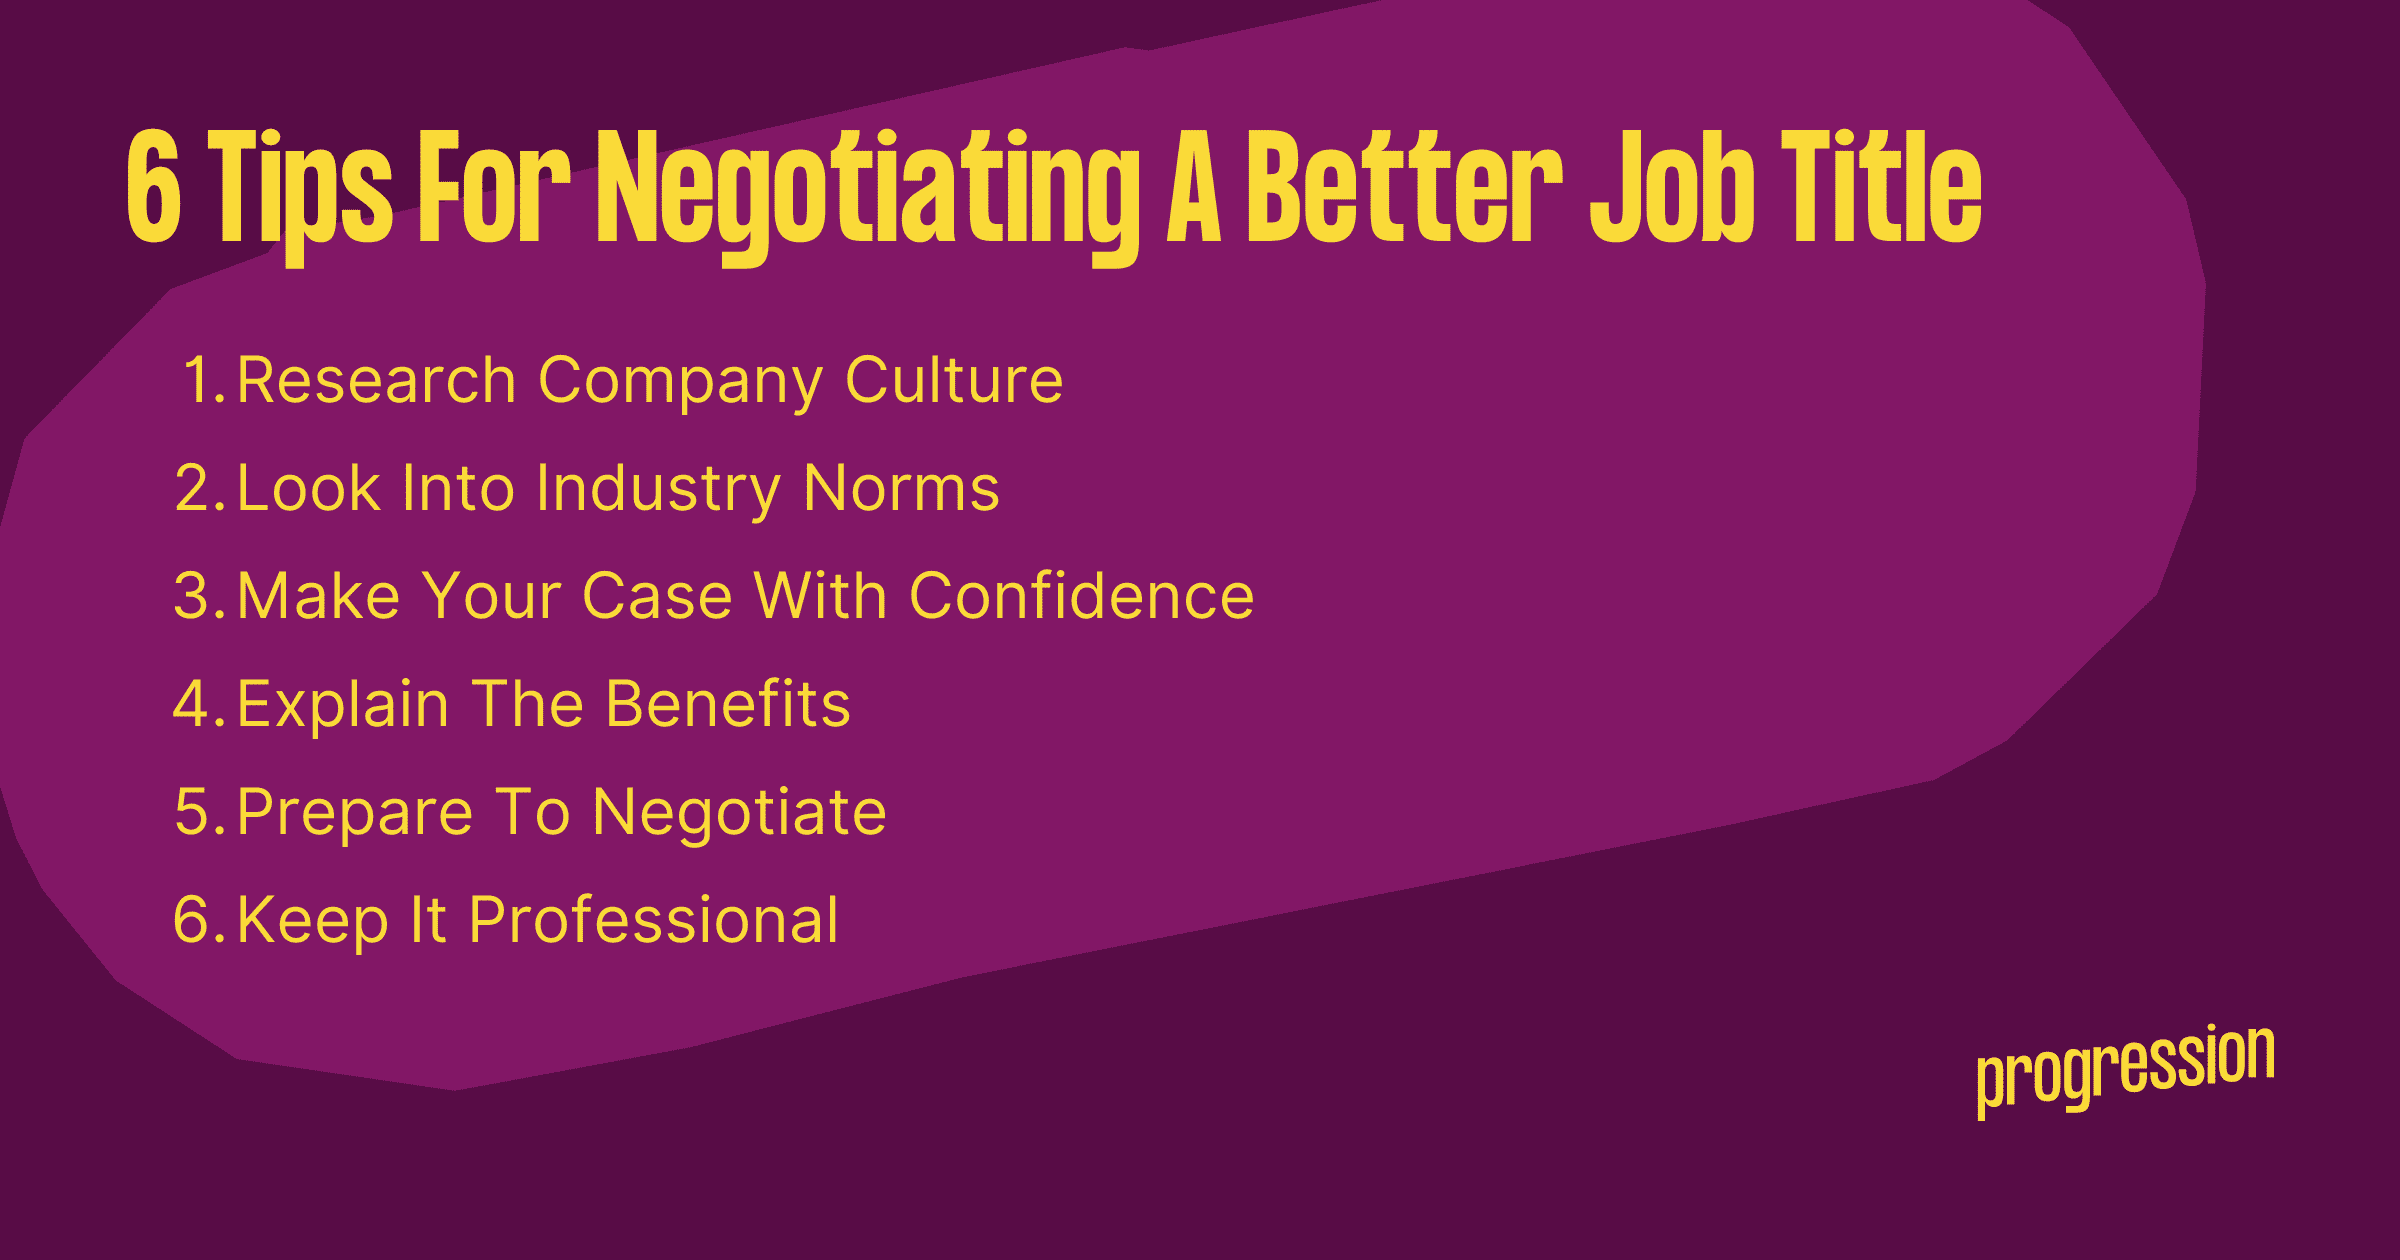 Graphic outlining 6 tips for negotiating a better job title